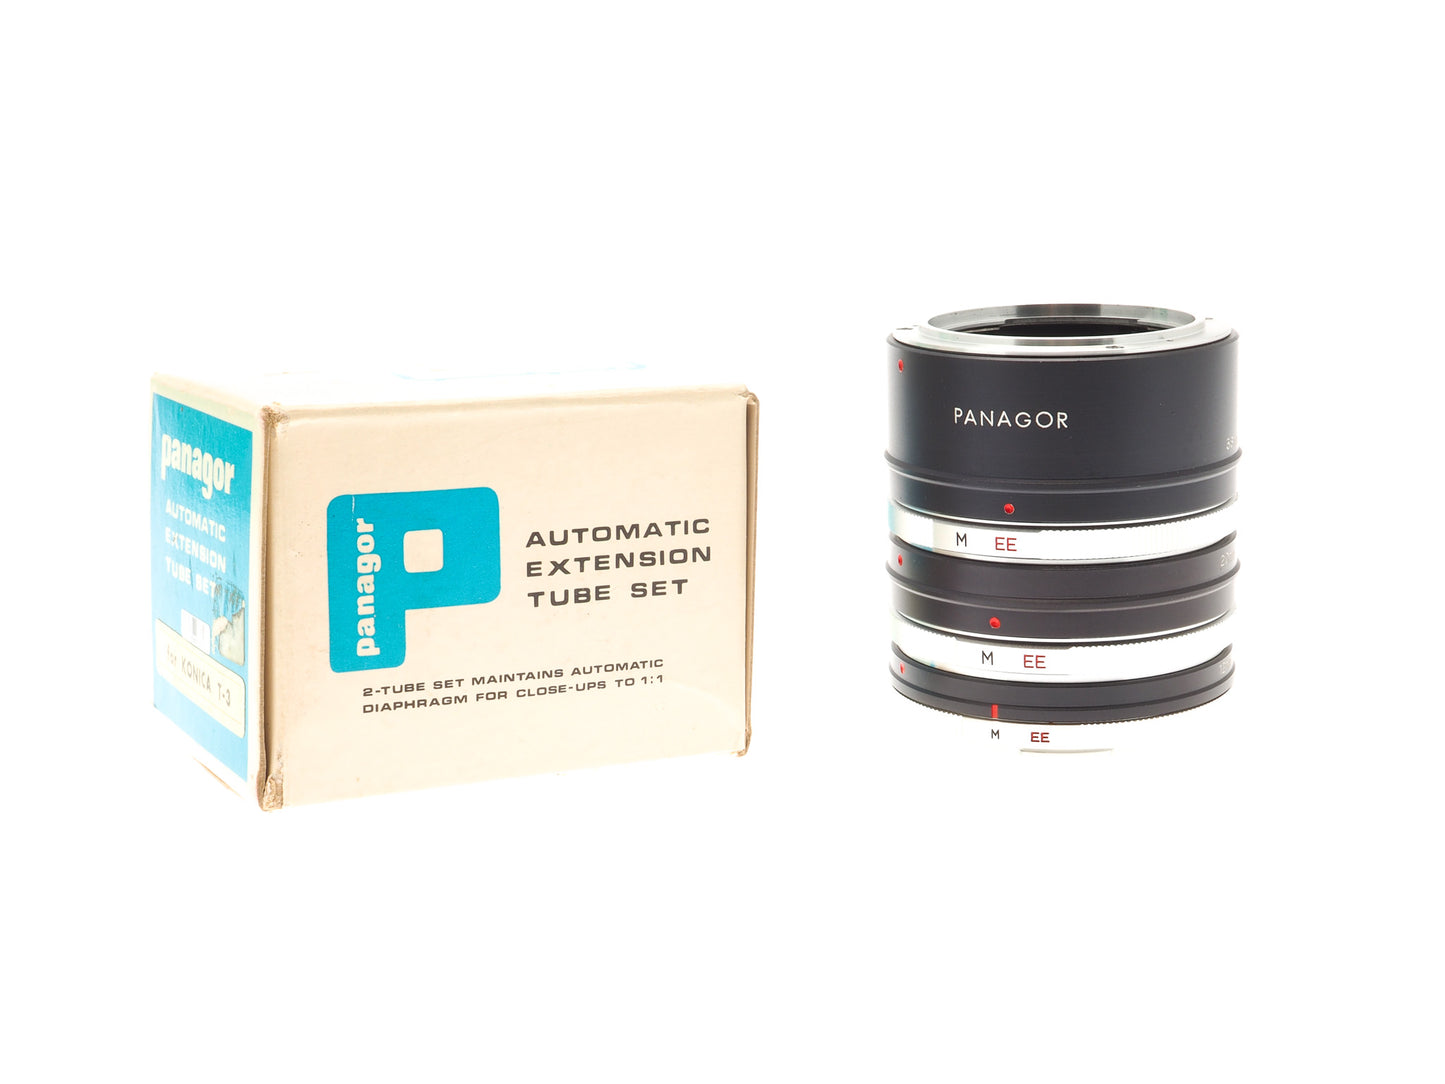 Panagor Automatic Extension Tube Set - Accessory